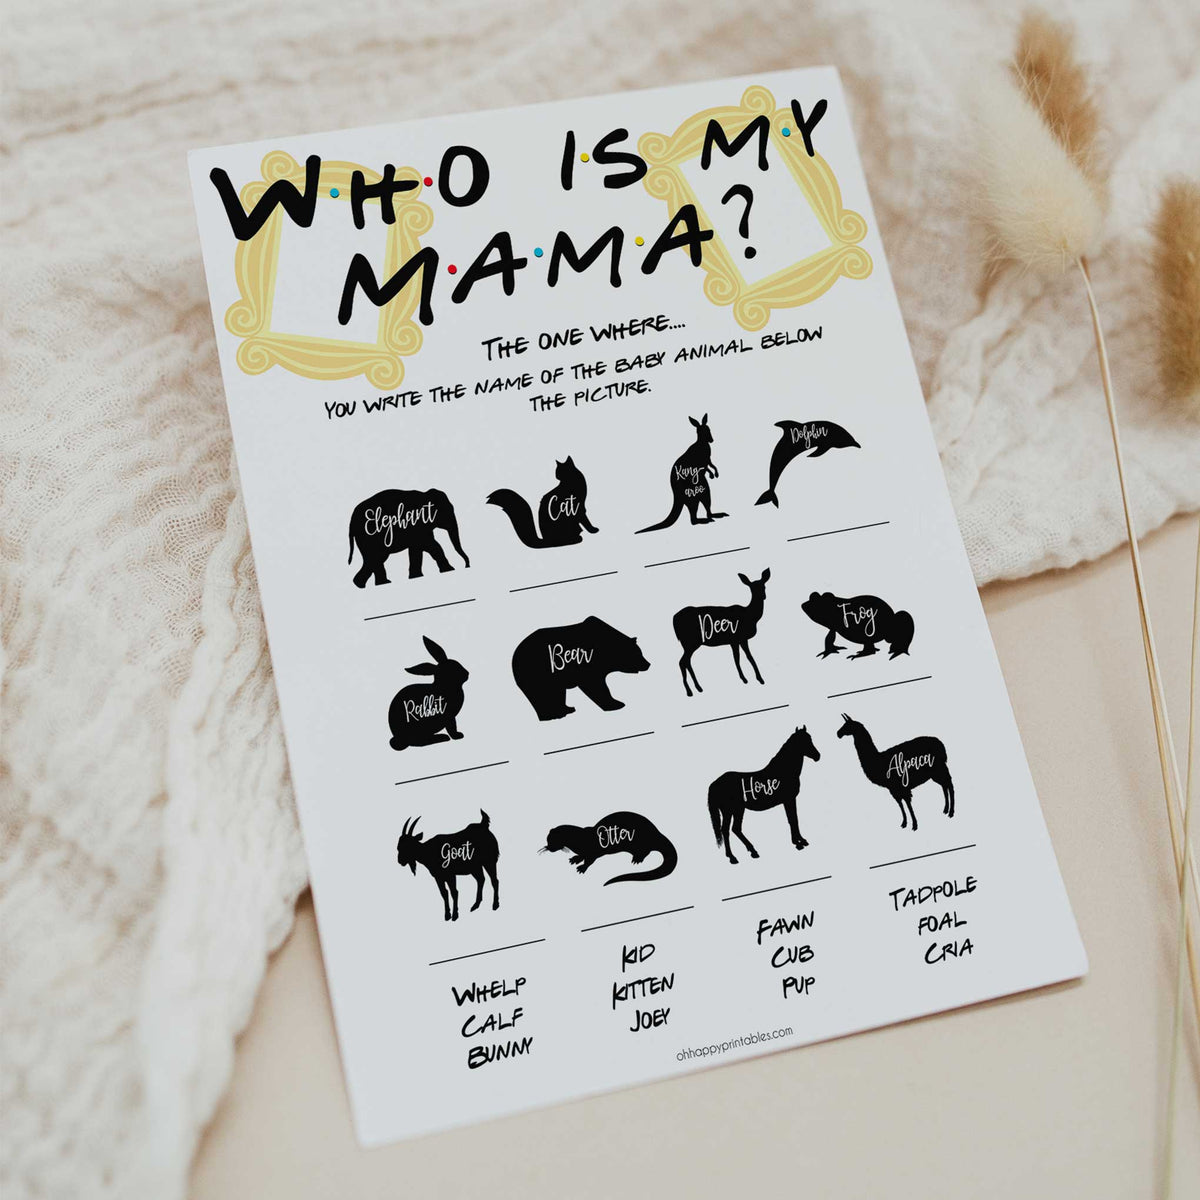 who is my mama game, Printable baby shower games, friends fun baby games, baby shower games, fun baby shower ideas, top baby shower ideas, friends baby shower, friends baby shower ideas